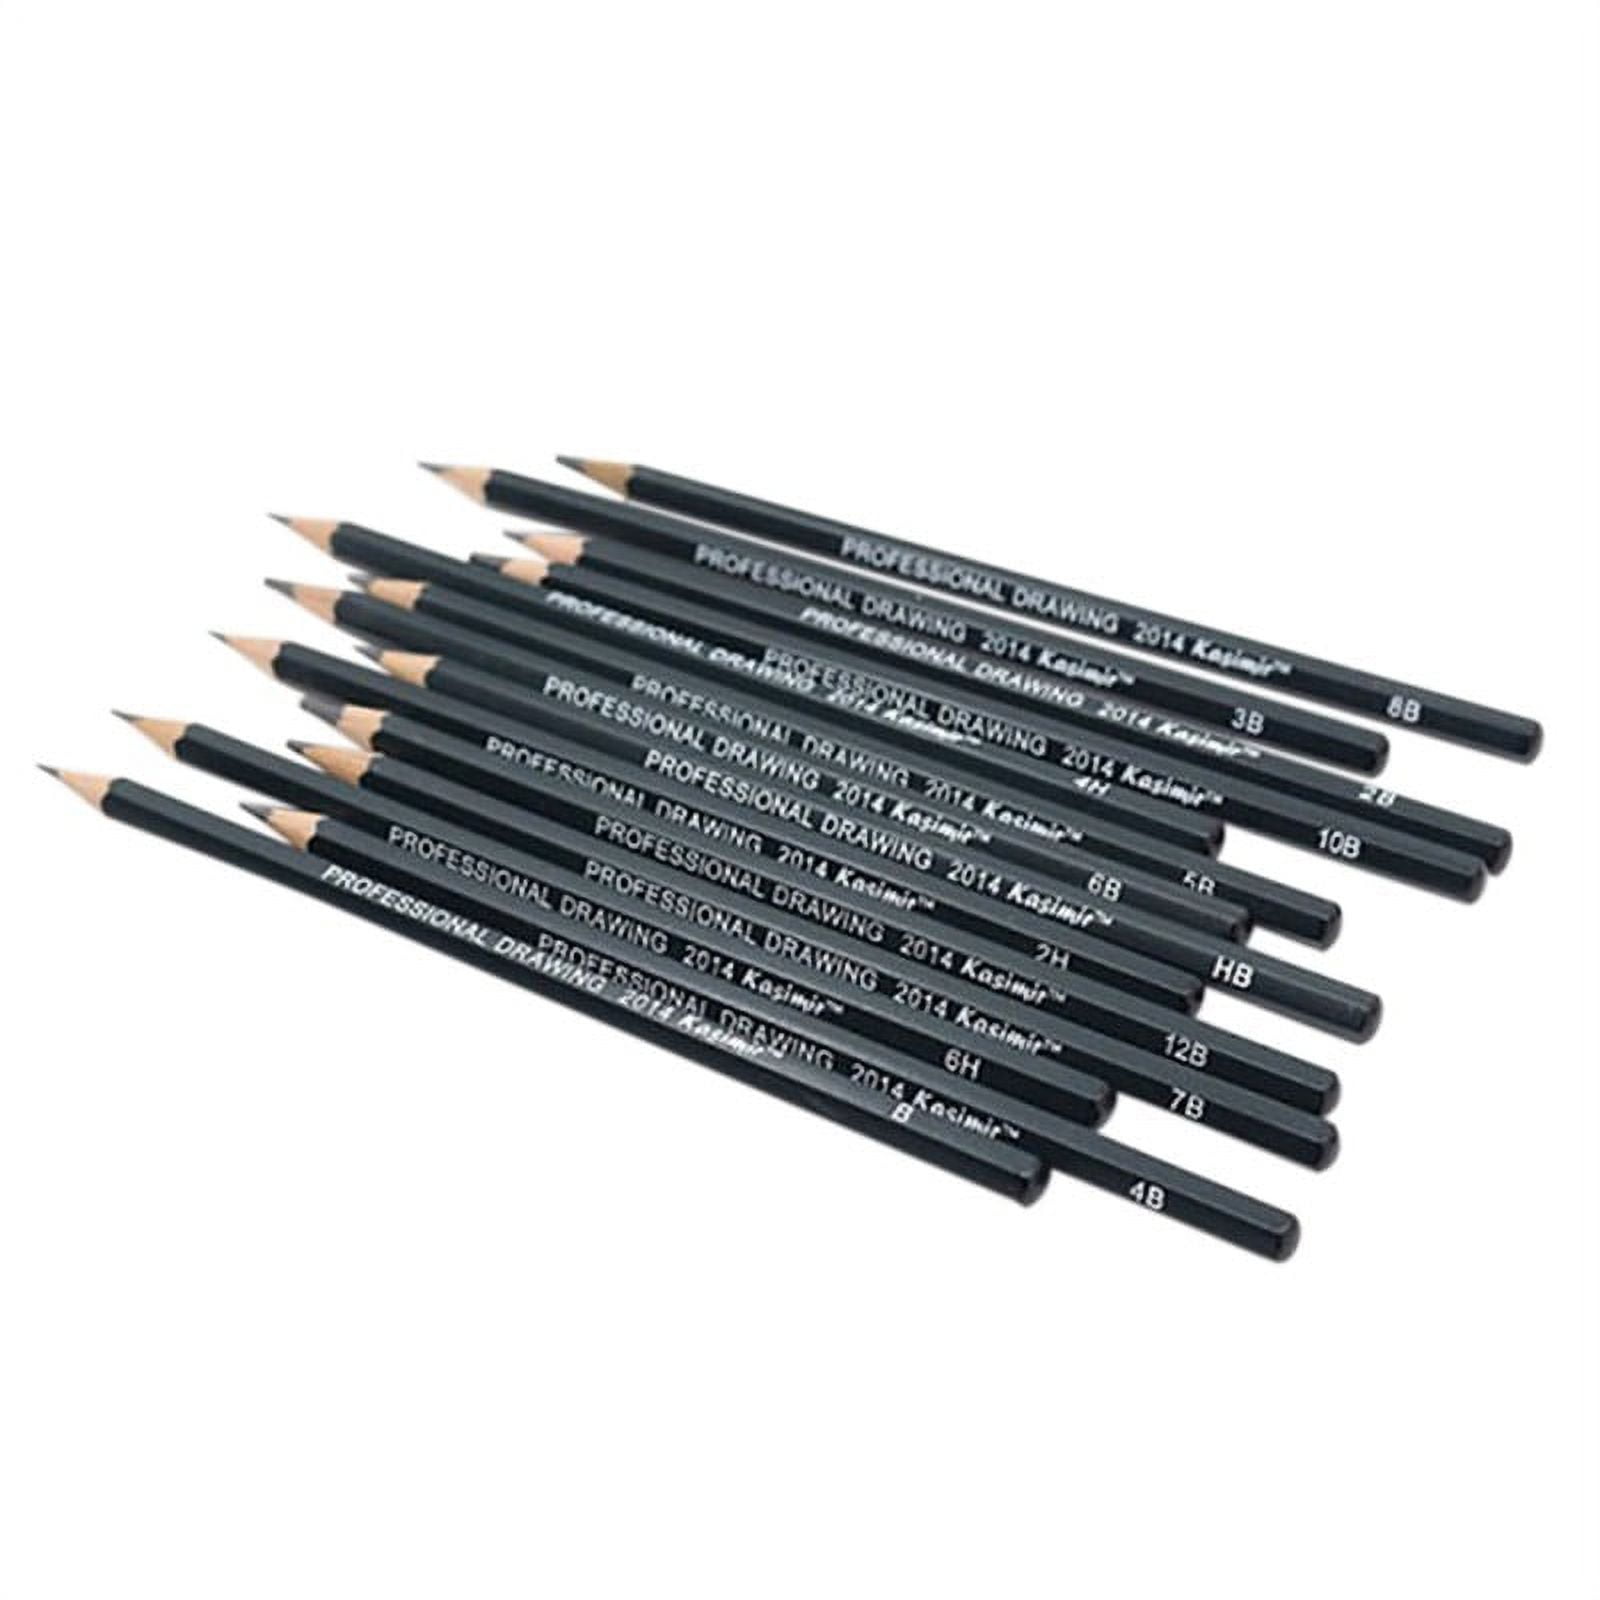 Oasis-X RNAB08RJYJ78P 6pcs woodless pencil set black woodless graphite  pencils hb, 2b, 4b, 6b, 8b and ee, drawing pencils for sketching, drawing an